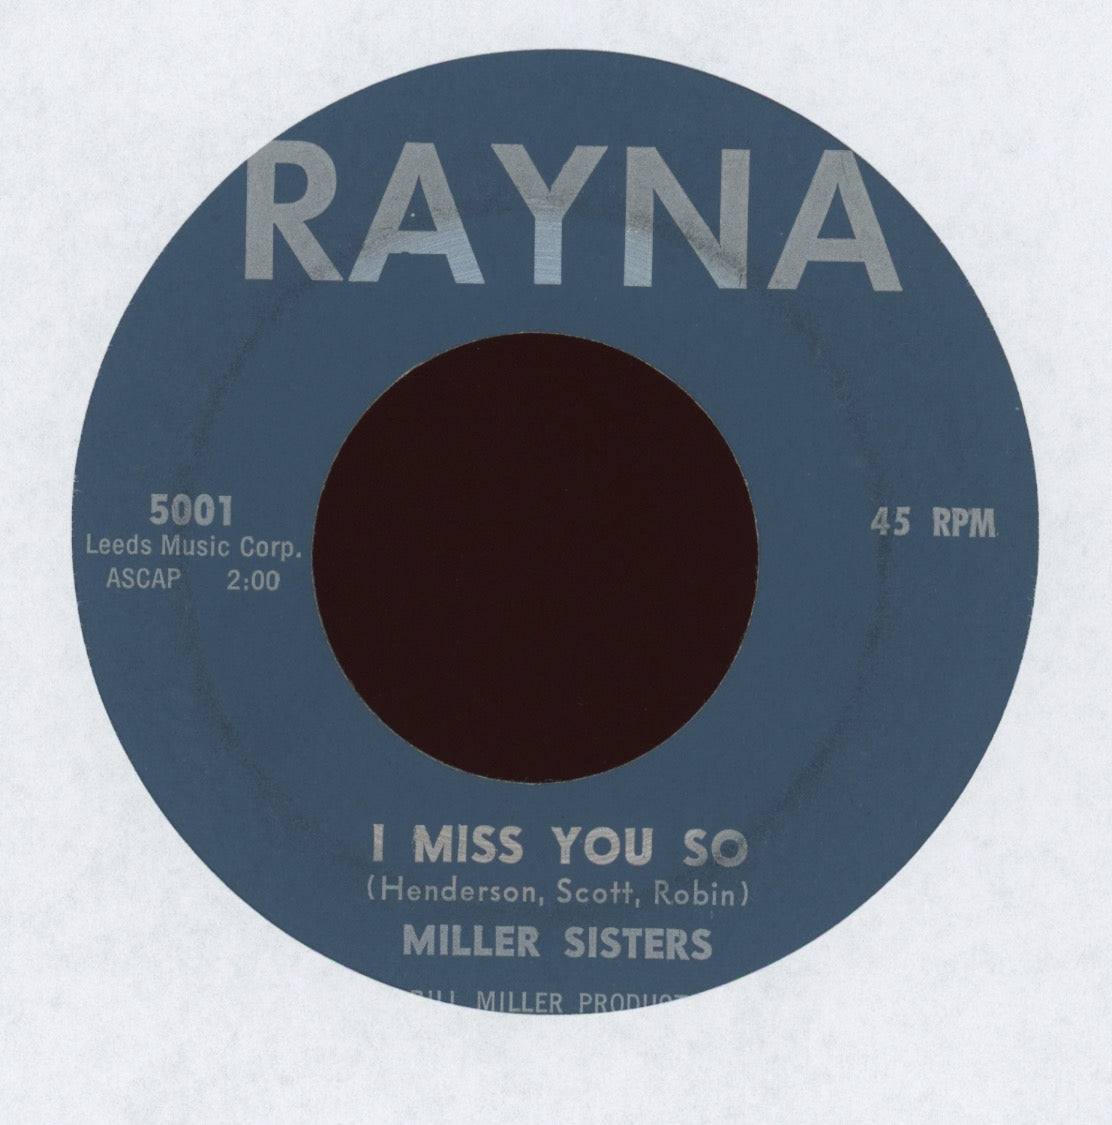 Miller Sisters - I Miss You So on Rayna